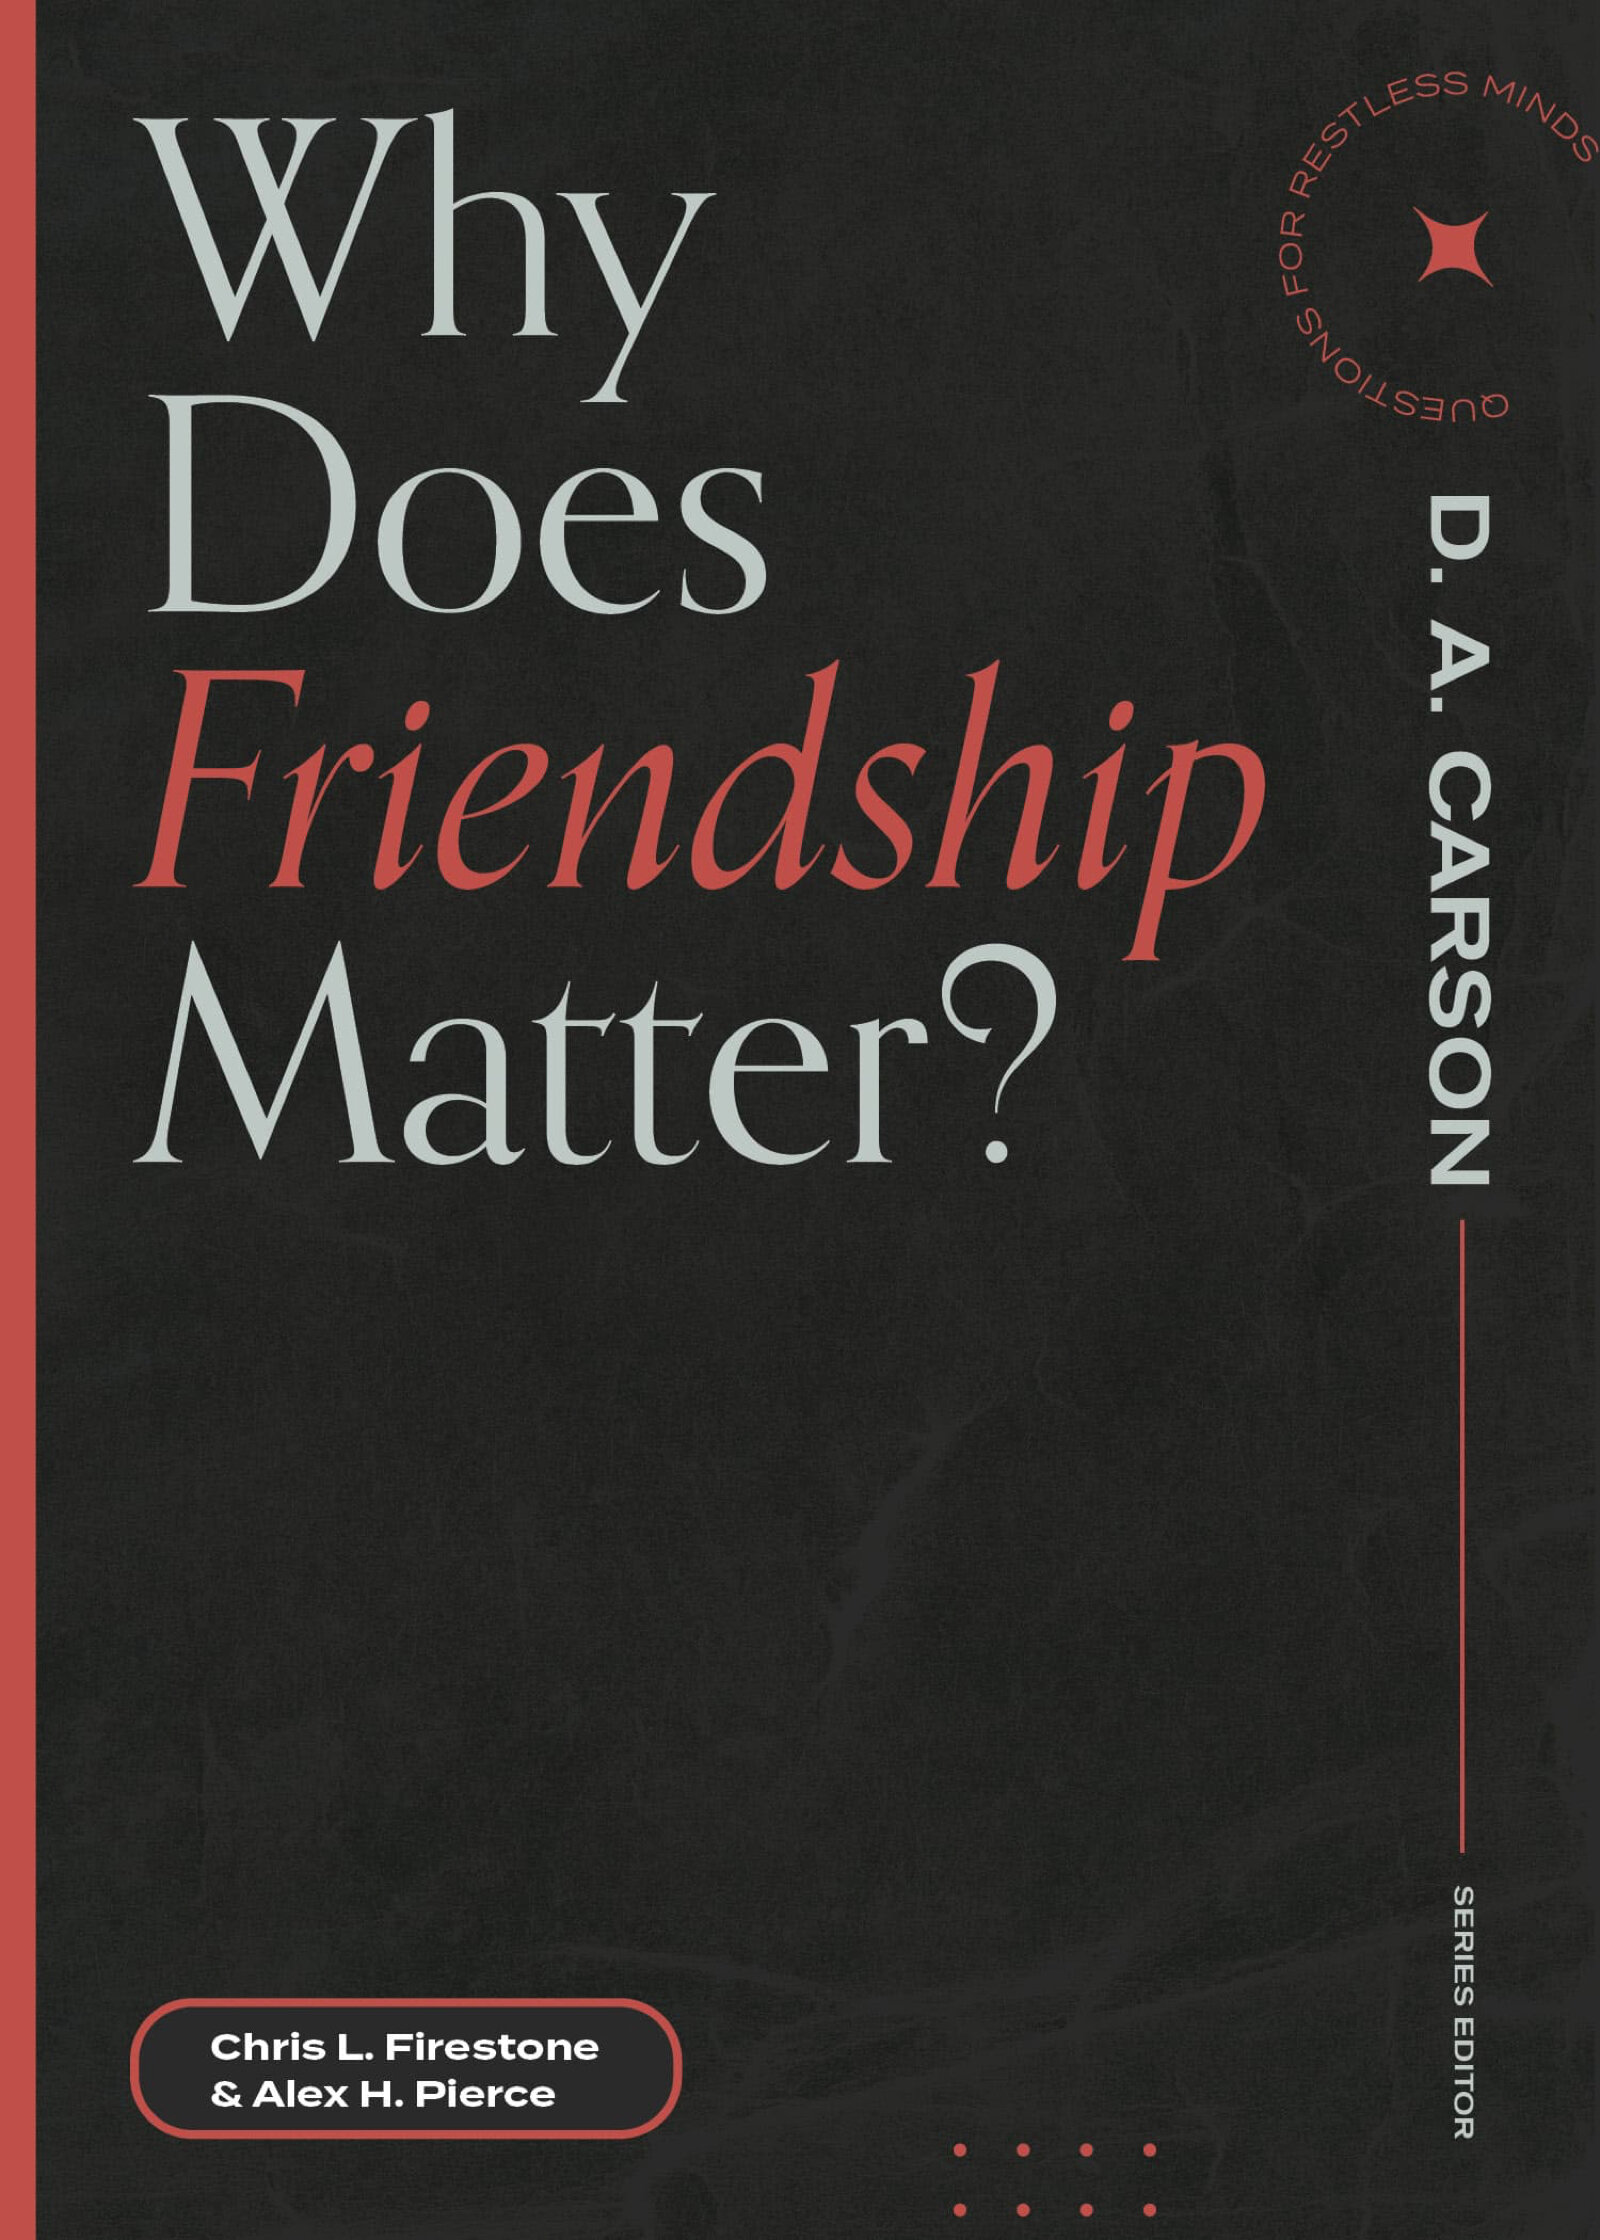 Why Does Friendship Matter? (Questions for Restless Minds)